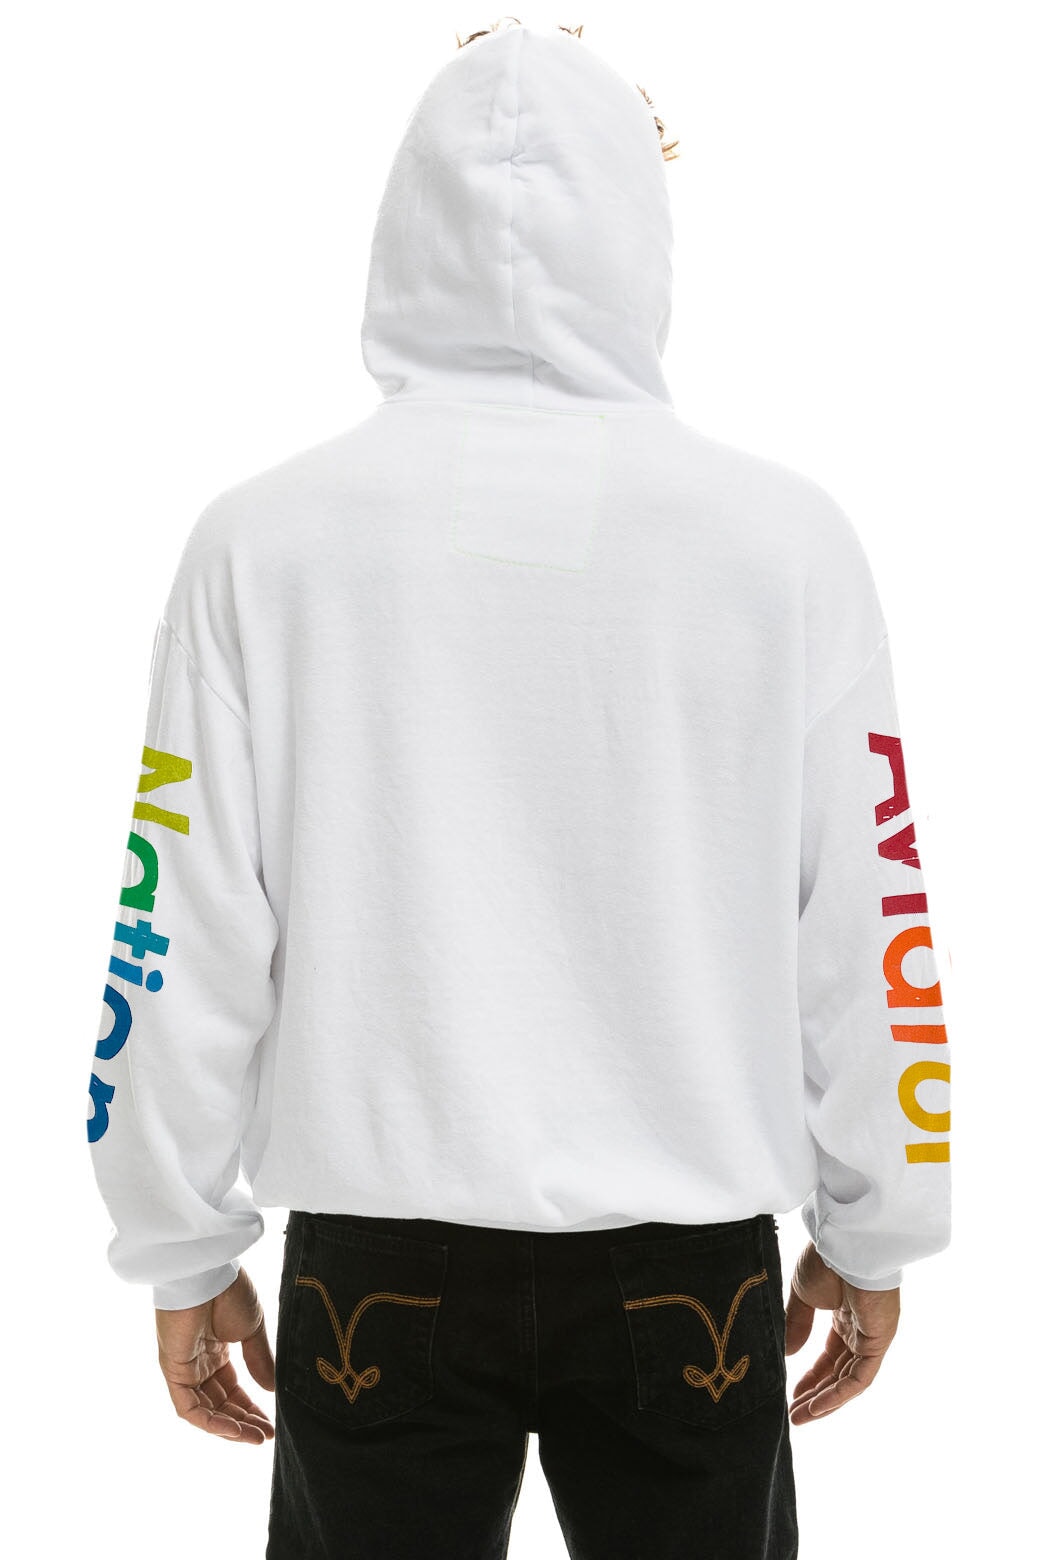 AVIATOR NATION NEW YORK CITY RELAXED PULLOVER HOODIE - WHITE Hoodie Aviator Nation 